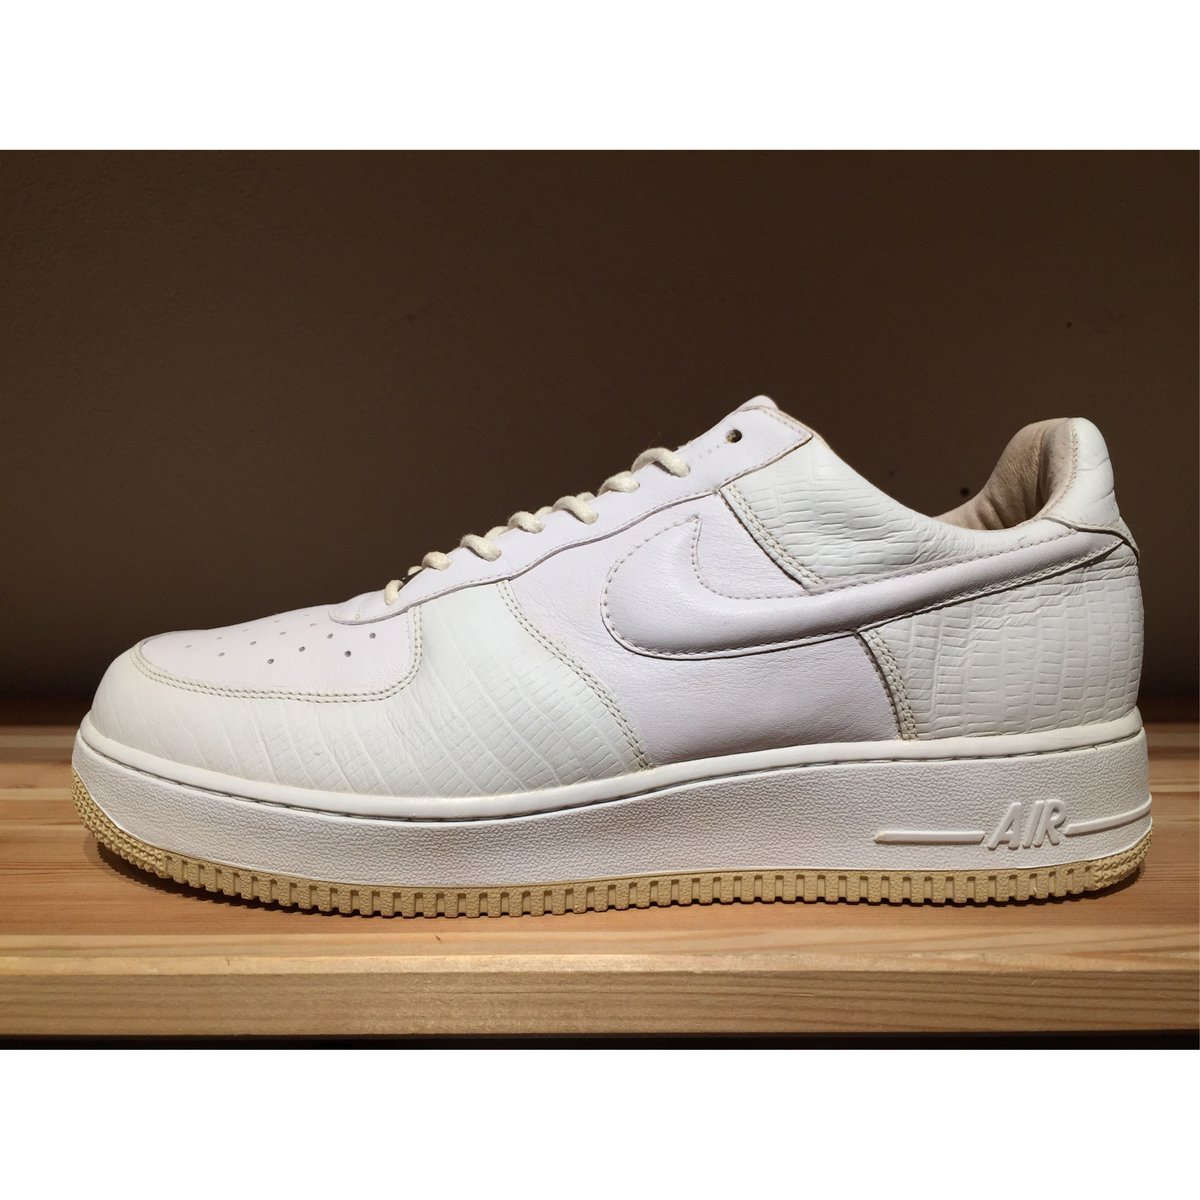 NIKE AIR FORCE 1 LUX 27.5cm